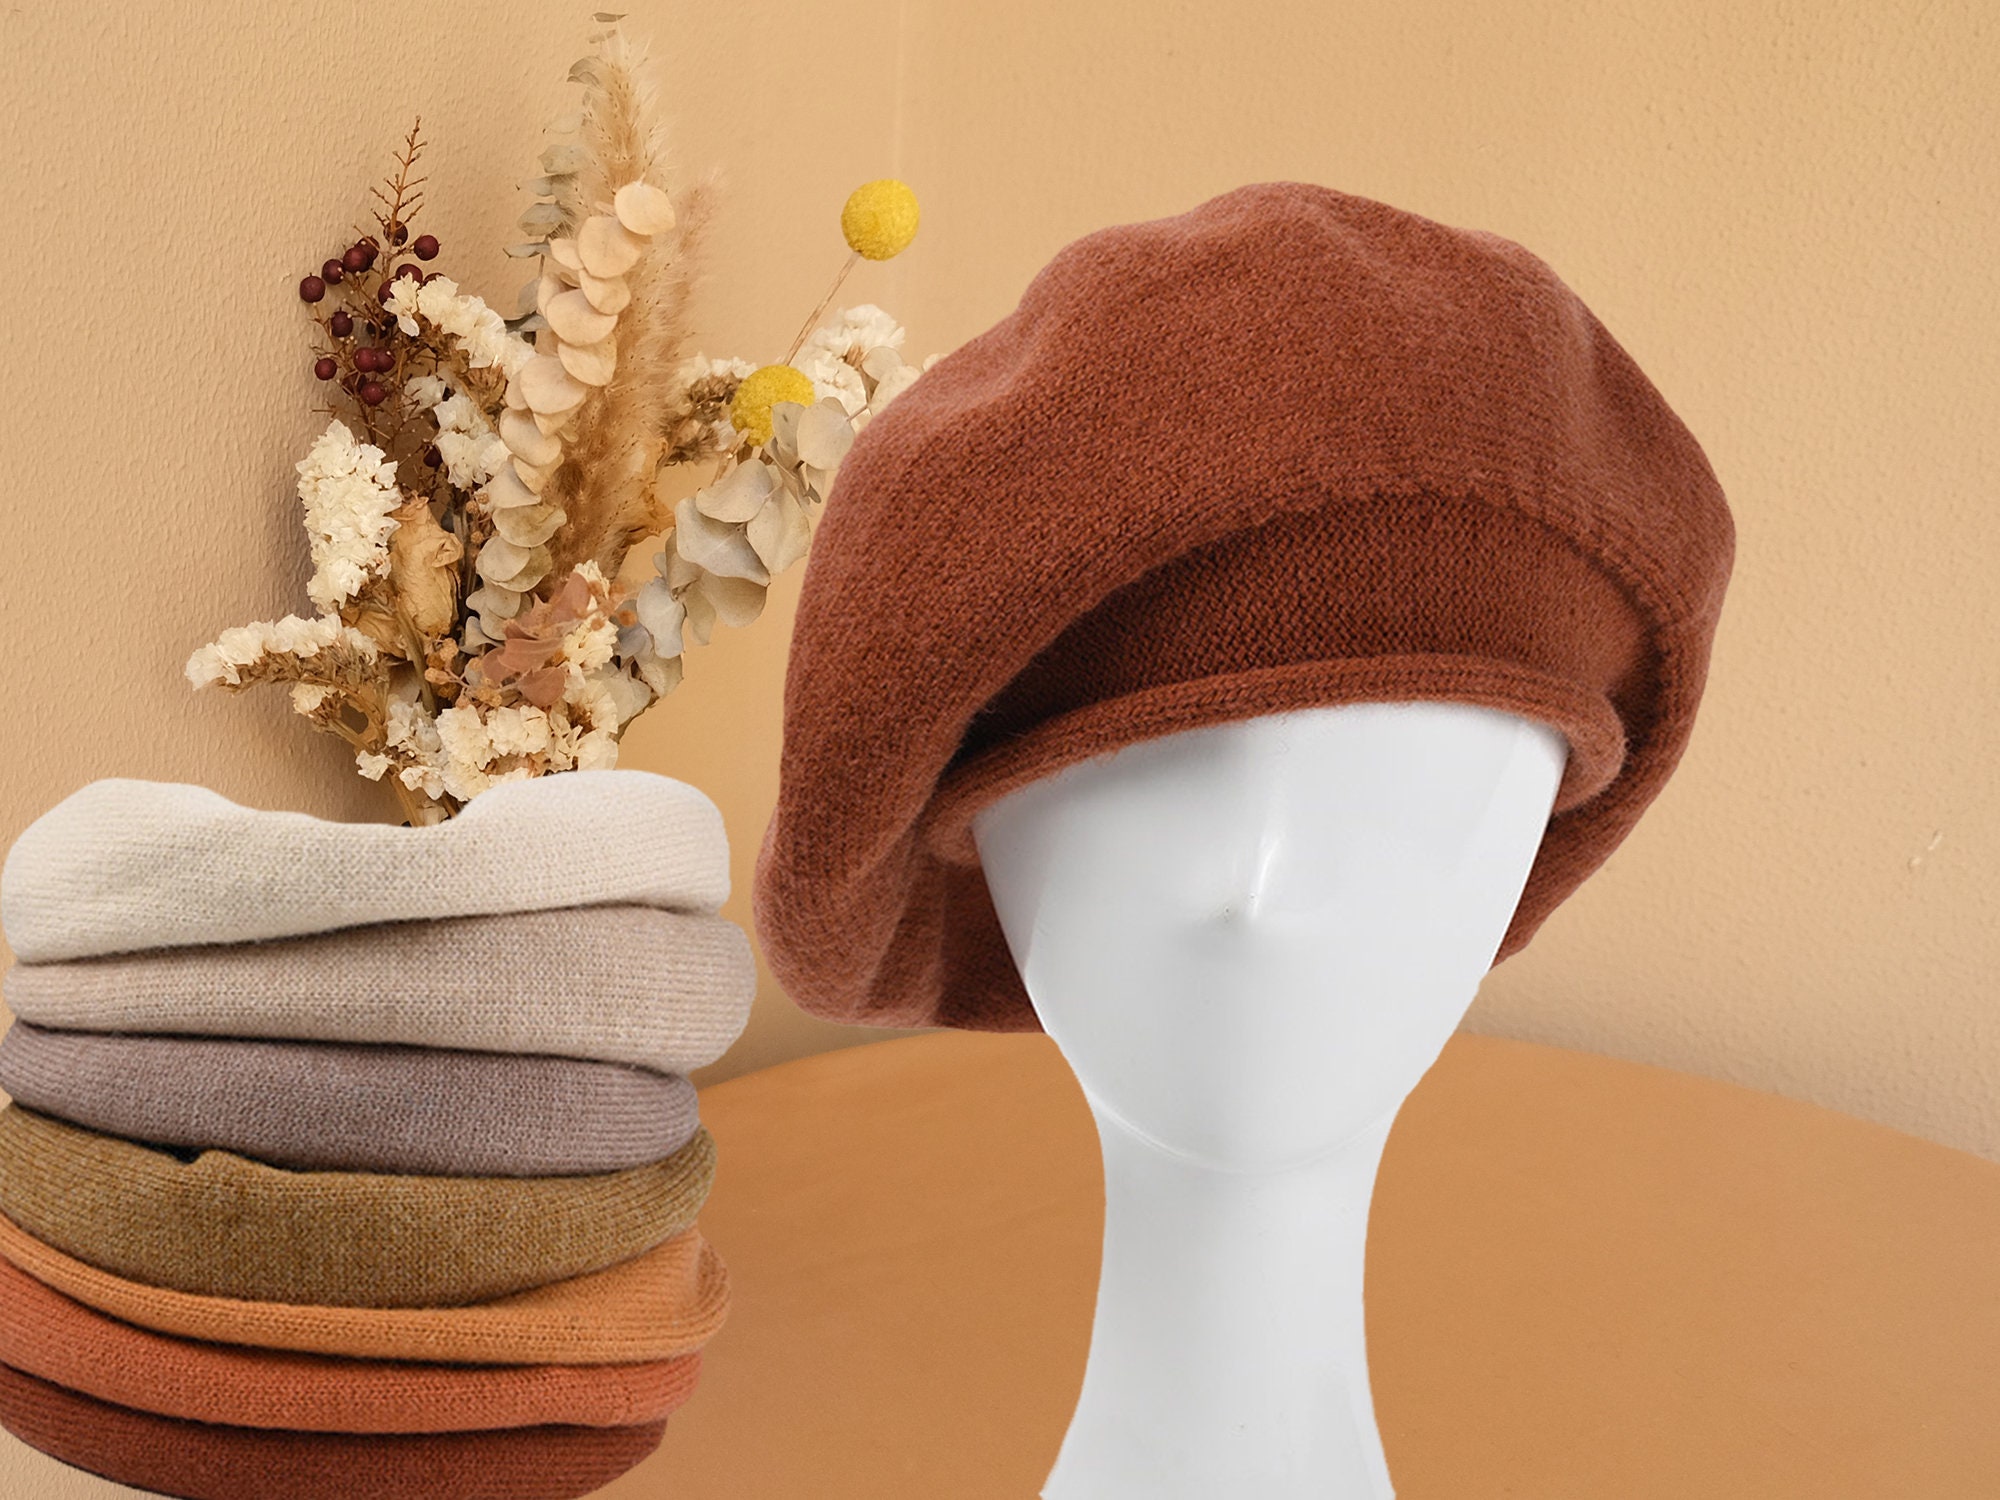 Oversized Plus Big Size Wool Winter Bucket Hat with Stitches On The Brim